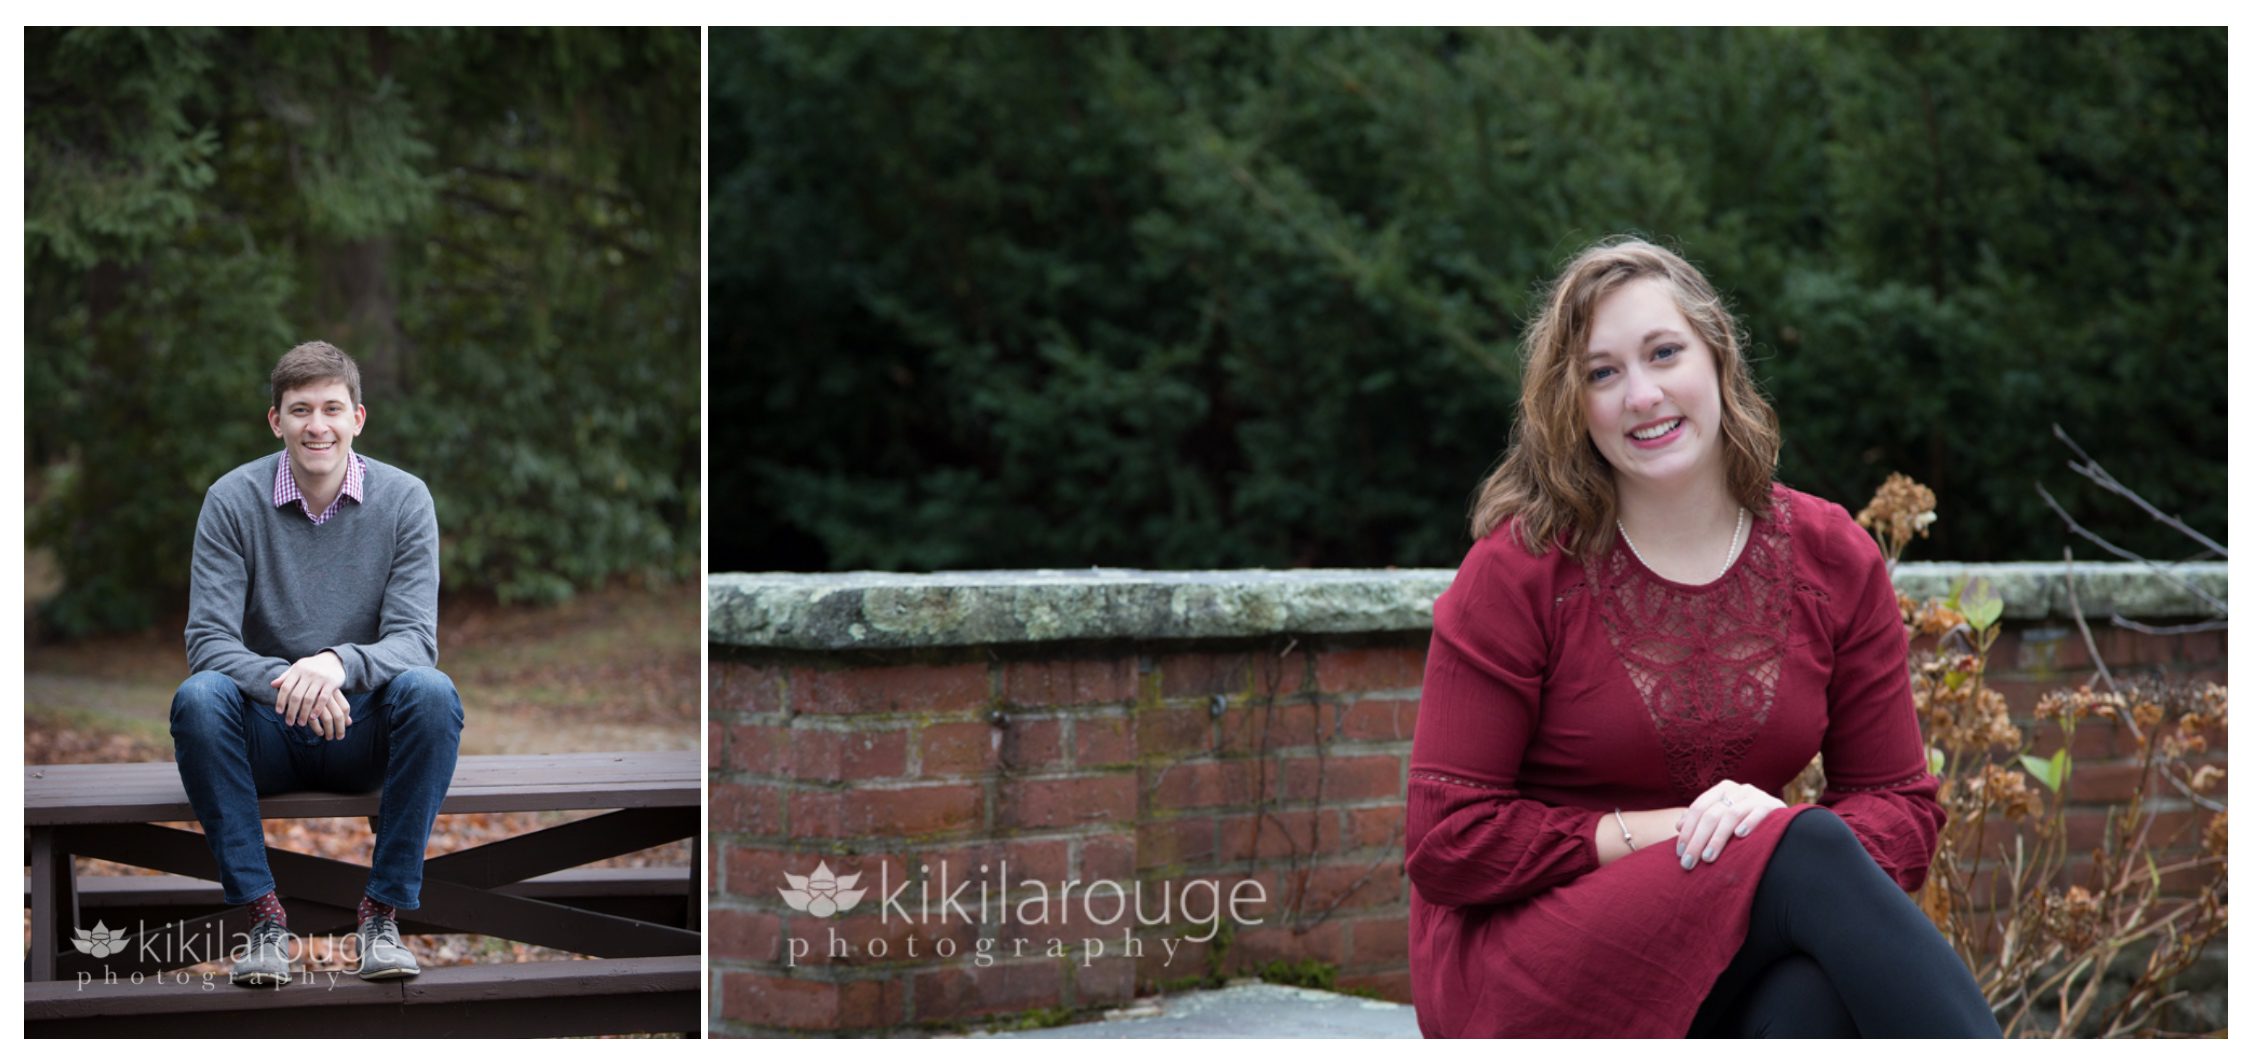 Son and daughter portraits at Maudslay Park